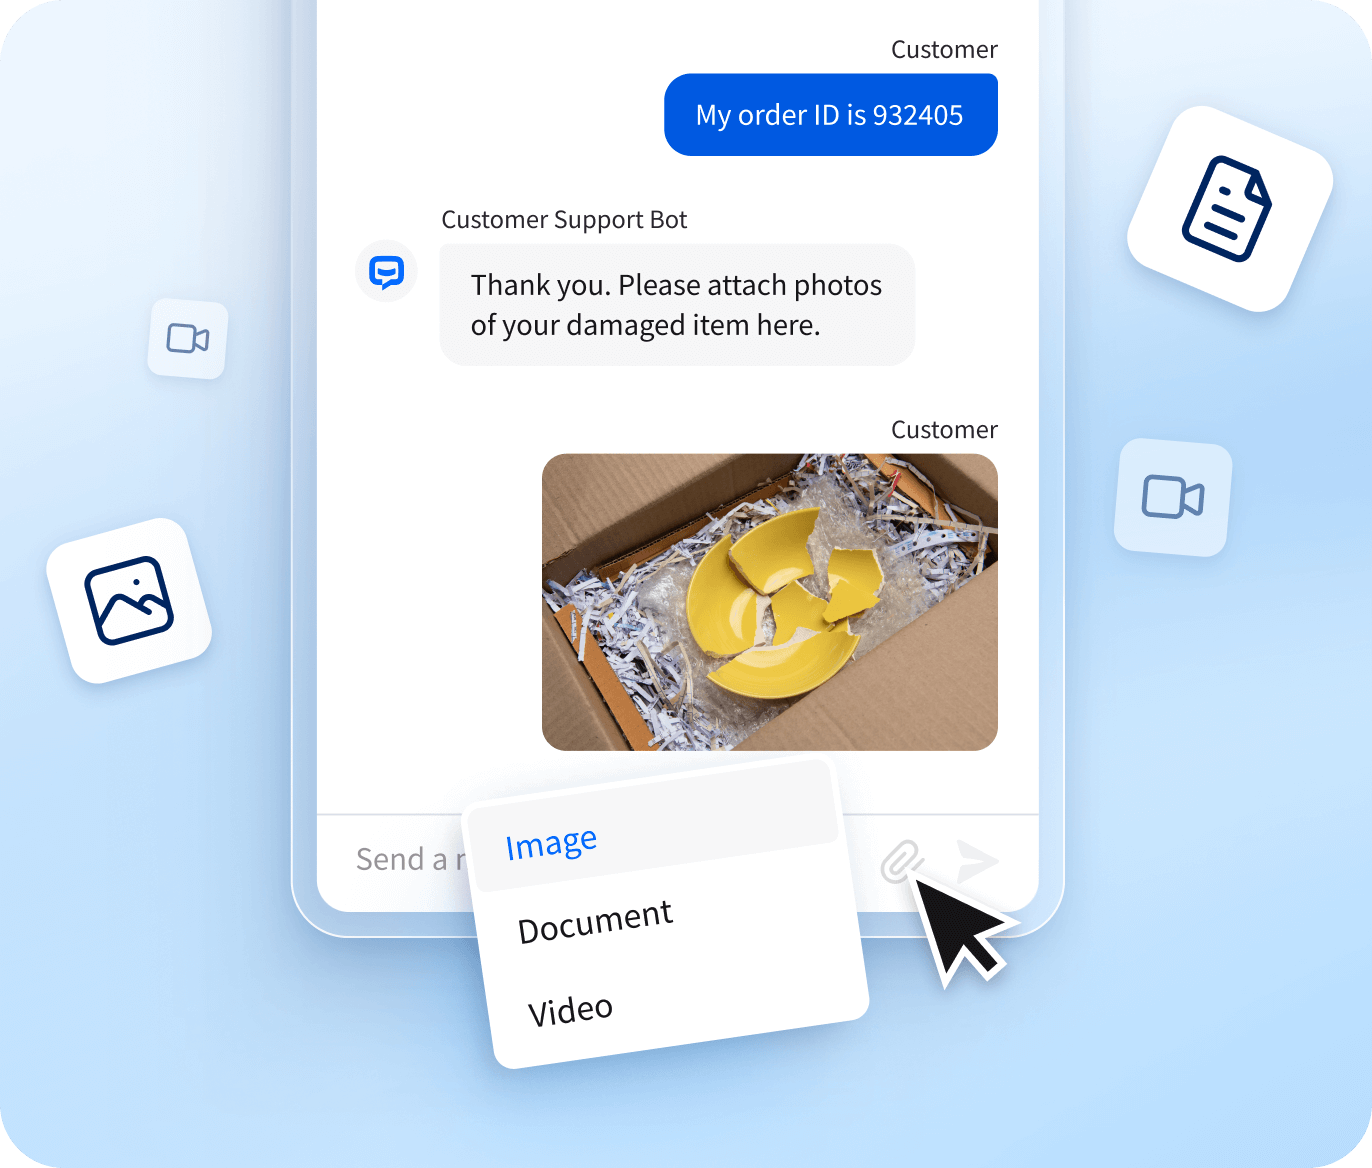 ChatBot feature where the user can send an image or other attachment like document or video, and it's collected by the chatbot.